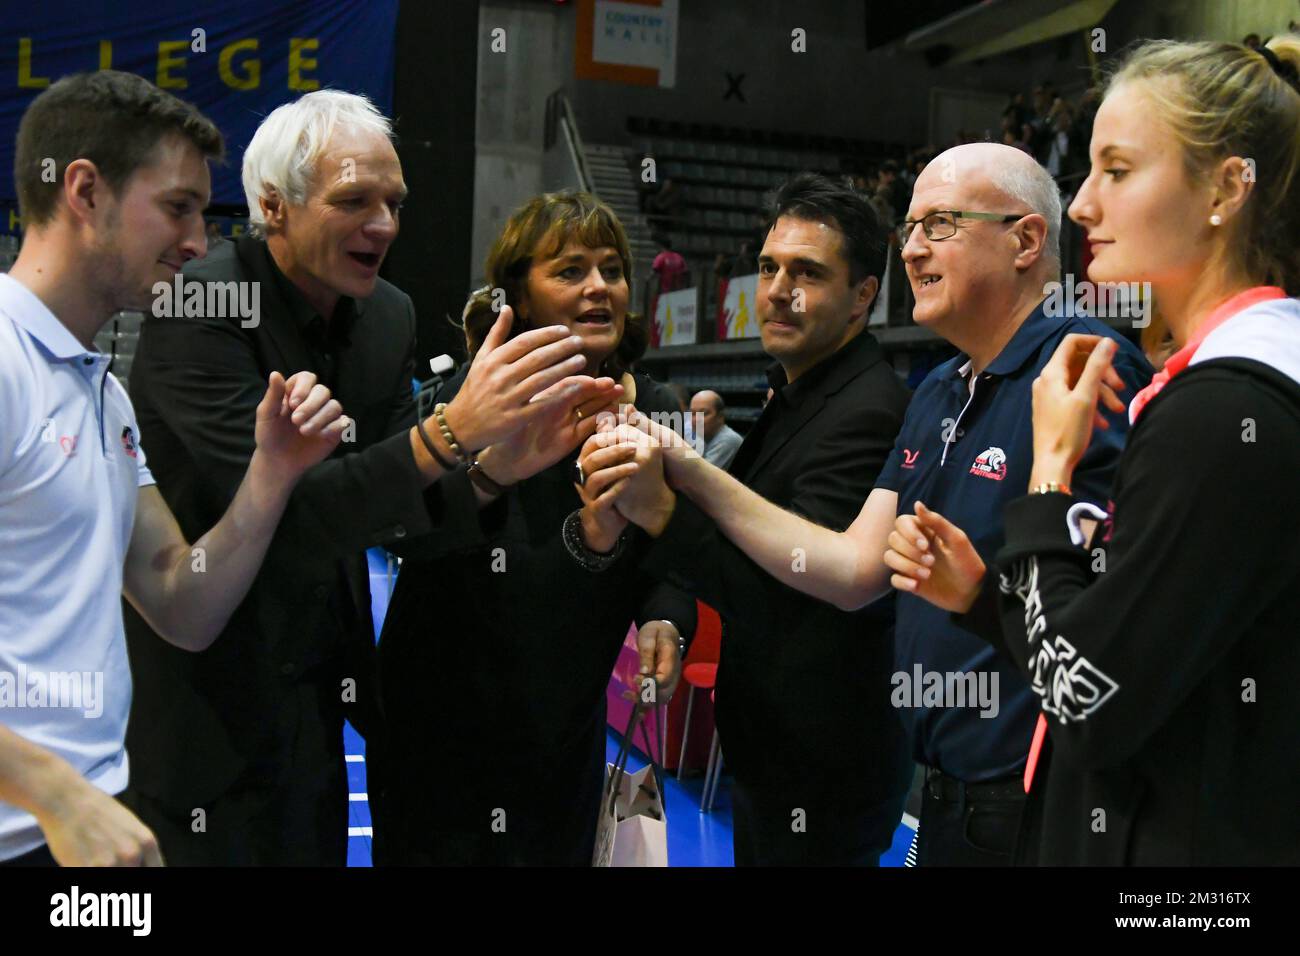 VOO Liege Panthers staff pictured before a basketball match between VOO Liege Panthers and BCF Elfic Fribourg, on the gameday 2, group J of the EuroCup Women, Wednesday 23 October 2019, Liege, Country Hall du Sart Tilman. PHOTO BERNARD GILLET Stock Photo